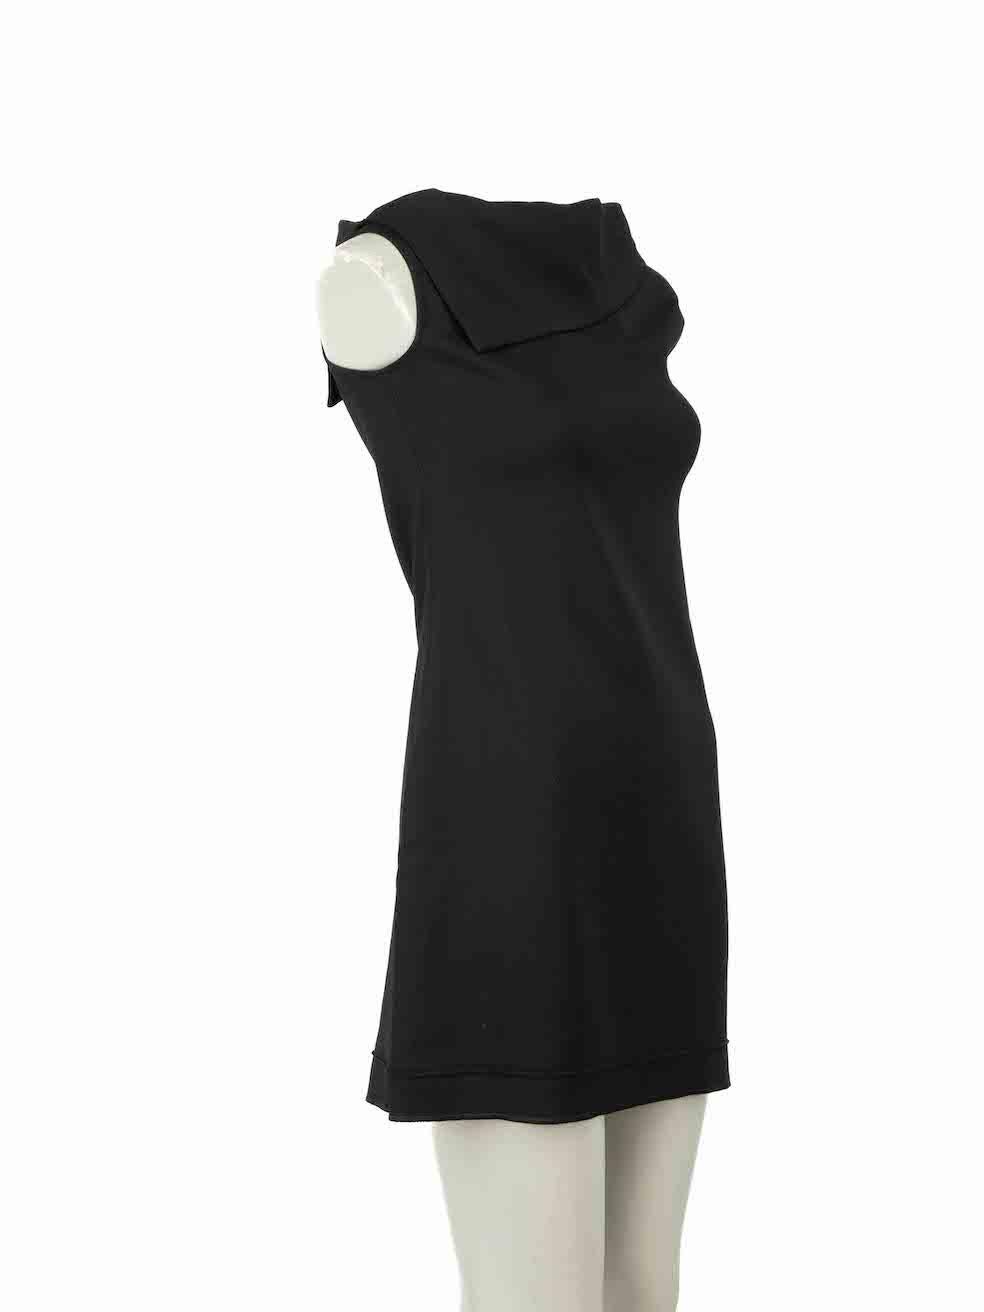 CONDITION is Very good. Hardly any visible wear to dress is evident on this used Helmut Lang designer resale item.
 
Details
Black
Wool
Mini dress
Asymmetric wide neckline
Sleeveless
Stretchy

Made in China
 
Composition 
52% Wool, 43% Polyamide and